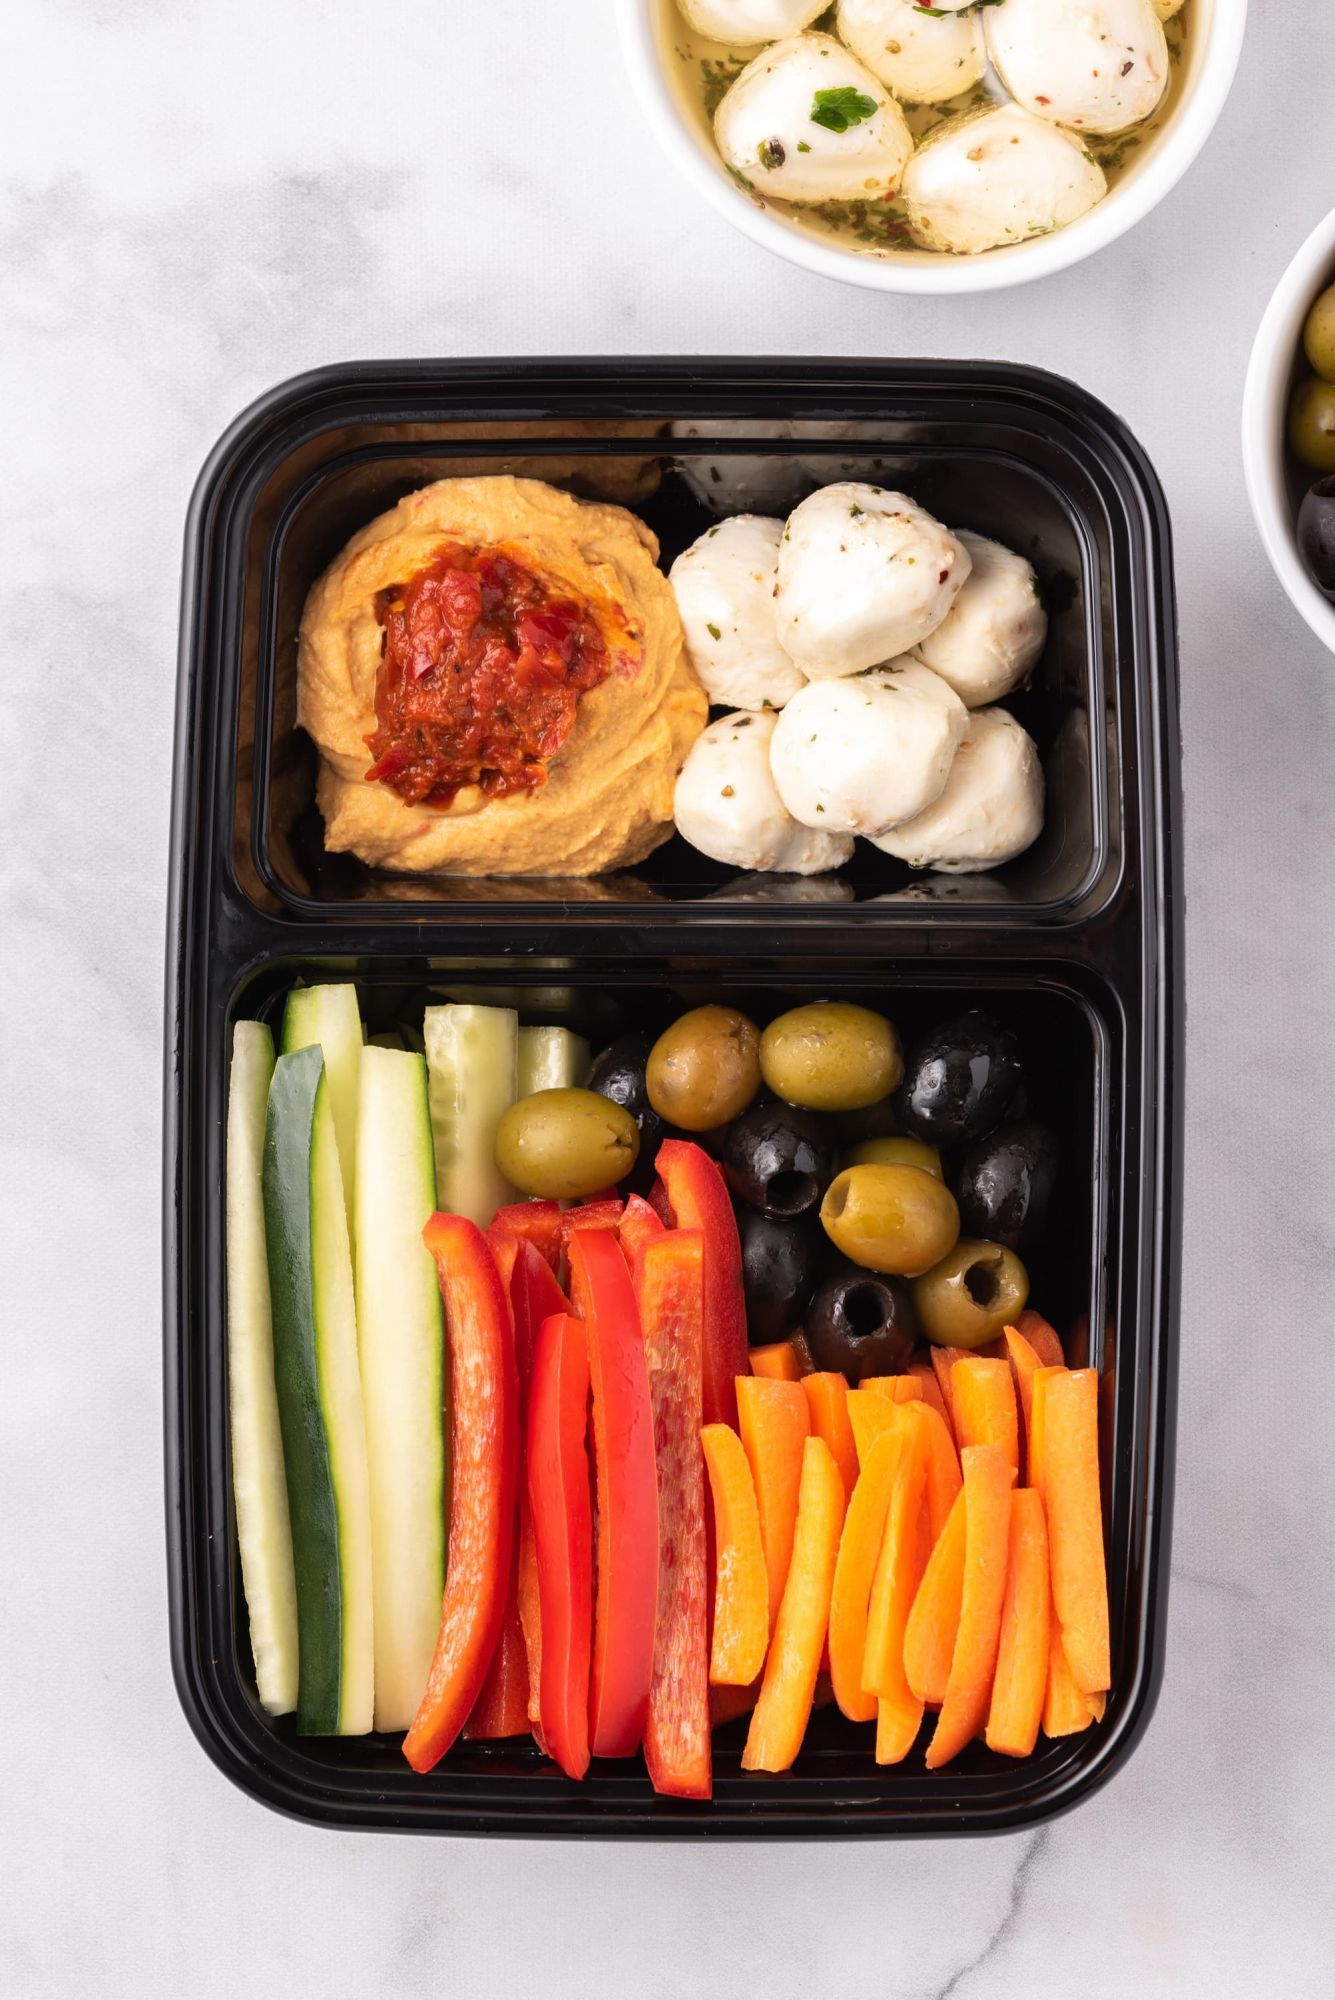 Bistro box with hummus, olives, mozzarella cheese, cucumbers, bell peppers, and carrots.